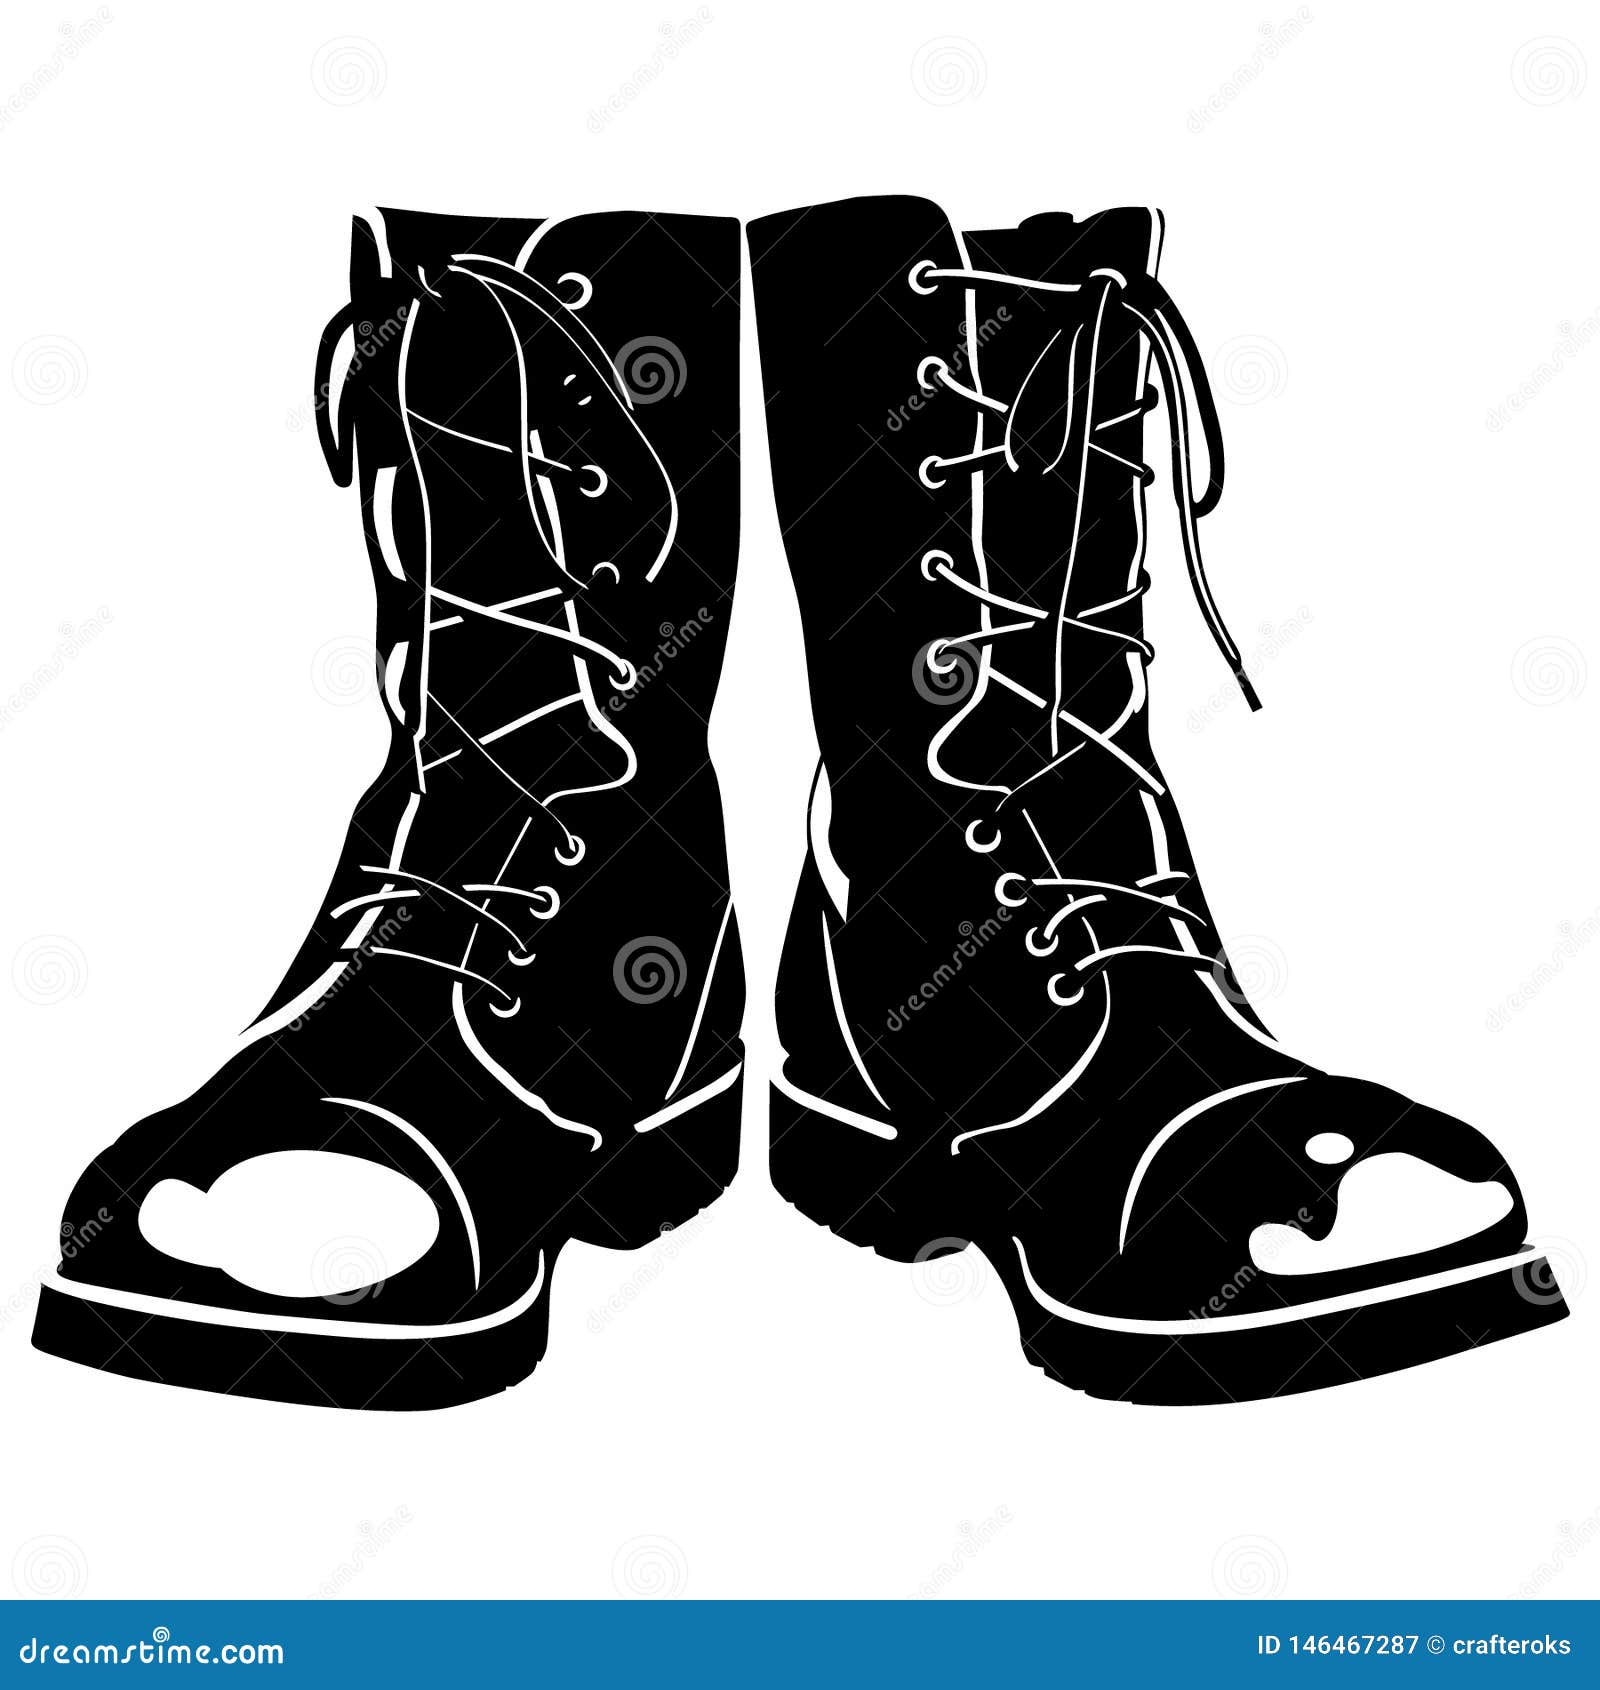 combat boots hand drawn crafteroks svg free, free svg file, eps, dxf, , logo, silhouette, icon, instant download, digital do